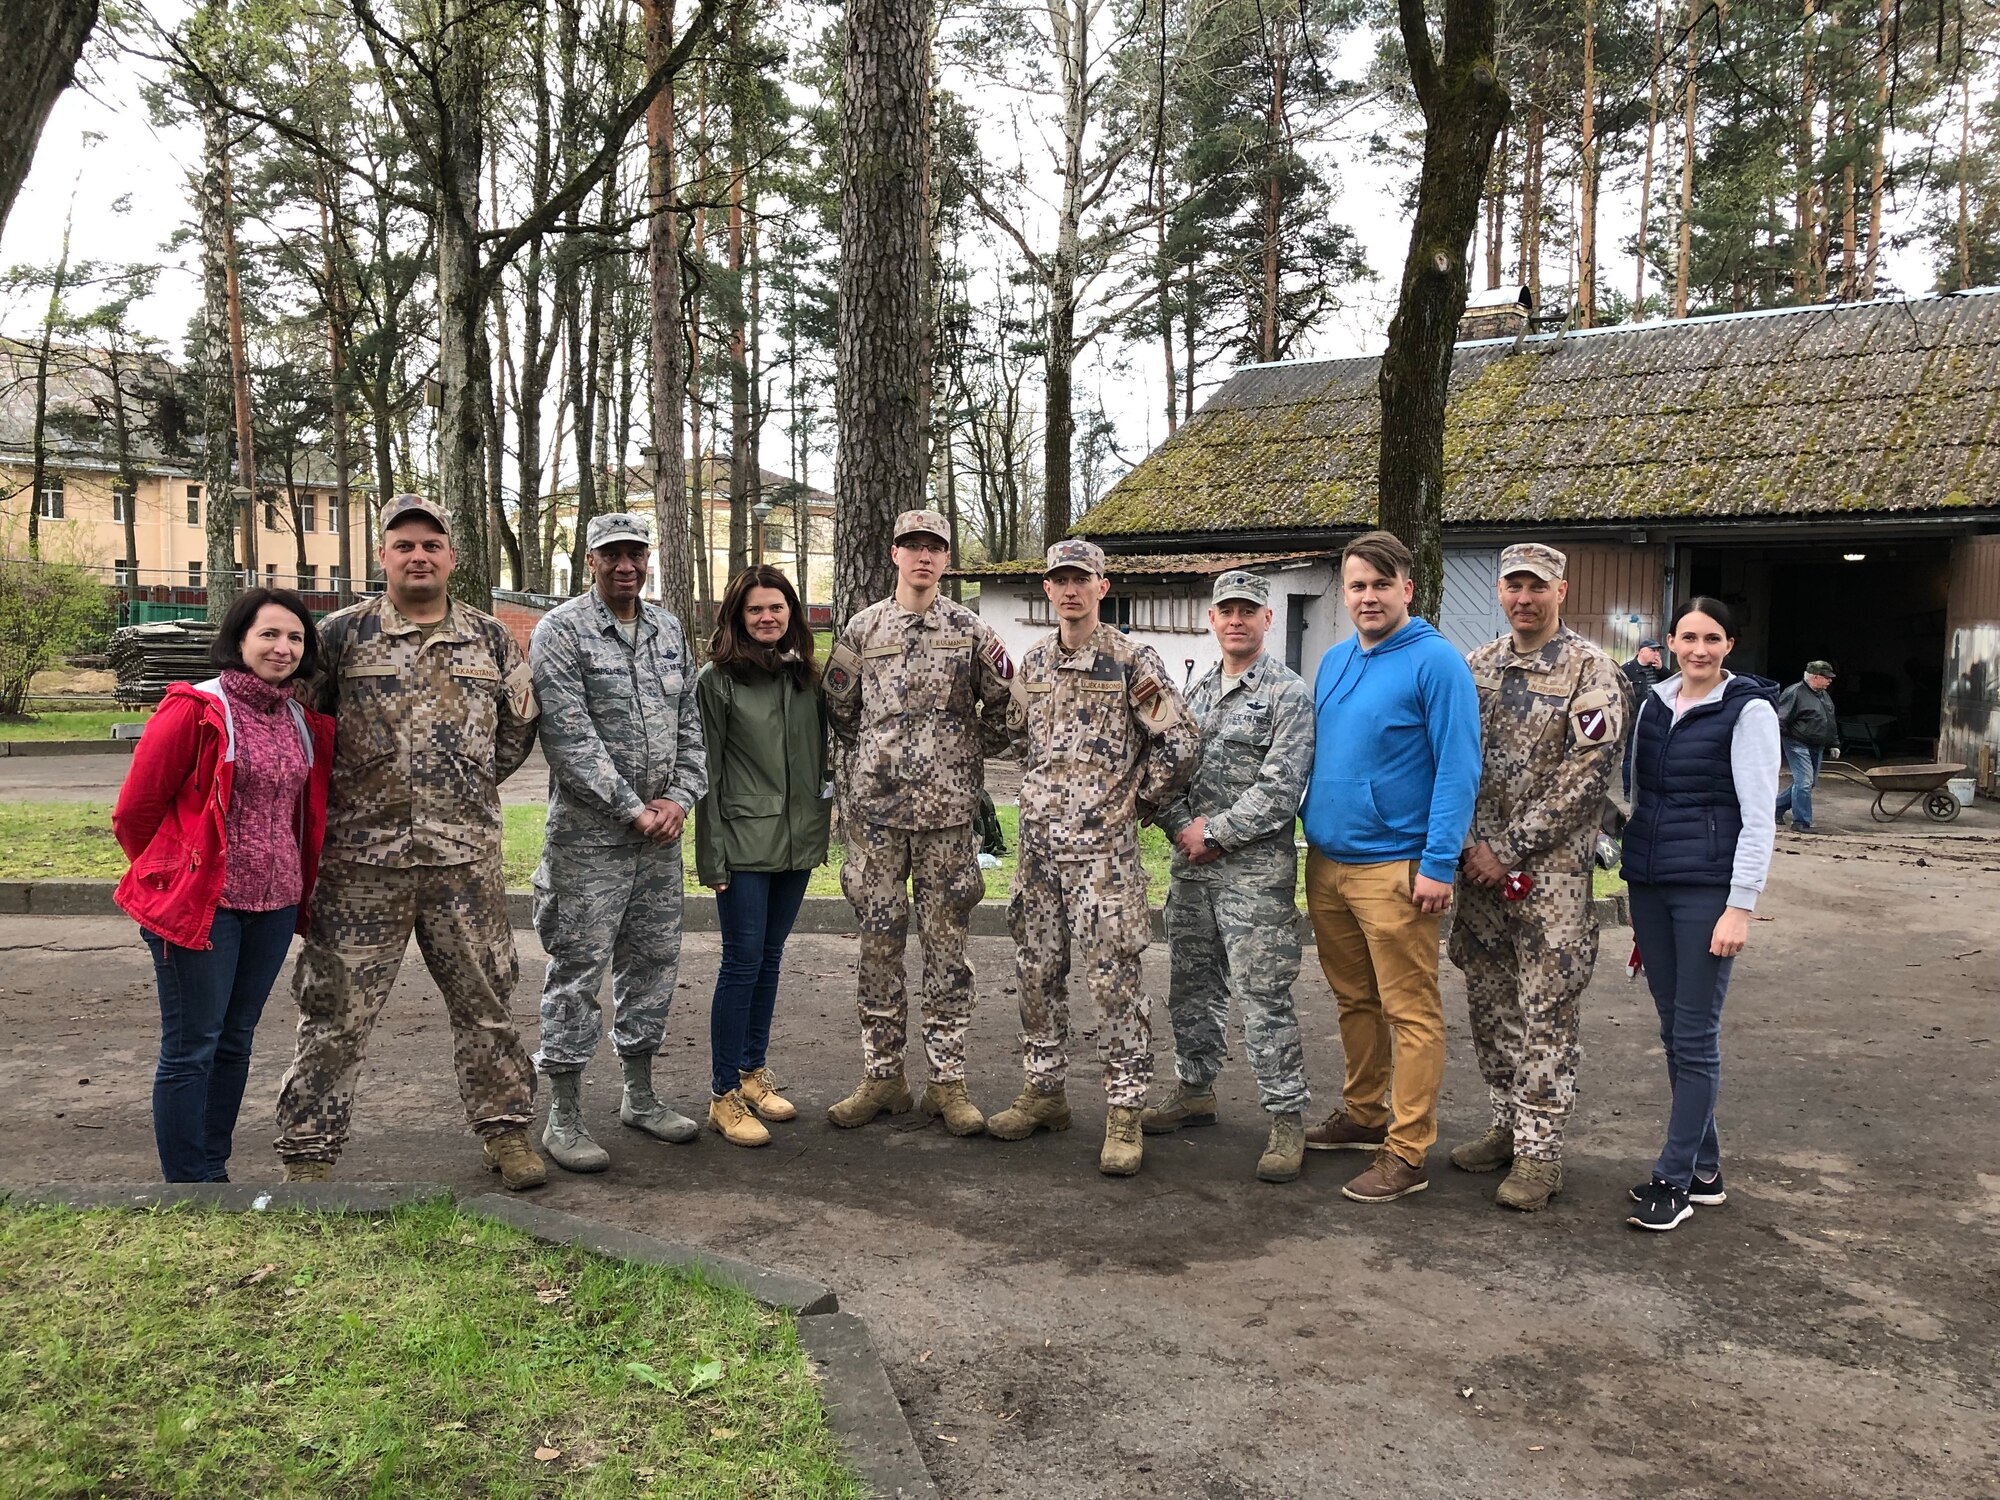 Soldiers and airmen from the Michigan National Guard participate in a volunteer work project at the National Social Care Center, Riga affiliate, as part of Latvia’s “National Clean-up Day,” along with four soldiers from the 407th Civil Affairs Team stationed at Lielvārde Air Base, two personnel from the U.S. Embassy Office of Defense Cooperation, and members of Latvia’s National Guard (Zemessardze) (Michigan National Guard photo by 1st Lt. Andrew Layton/released).